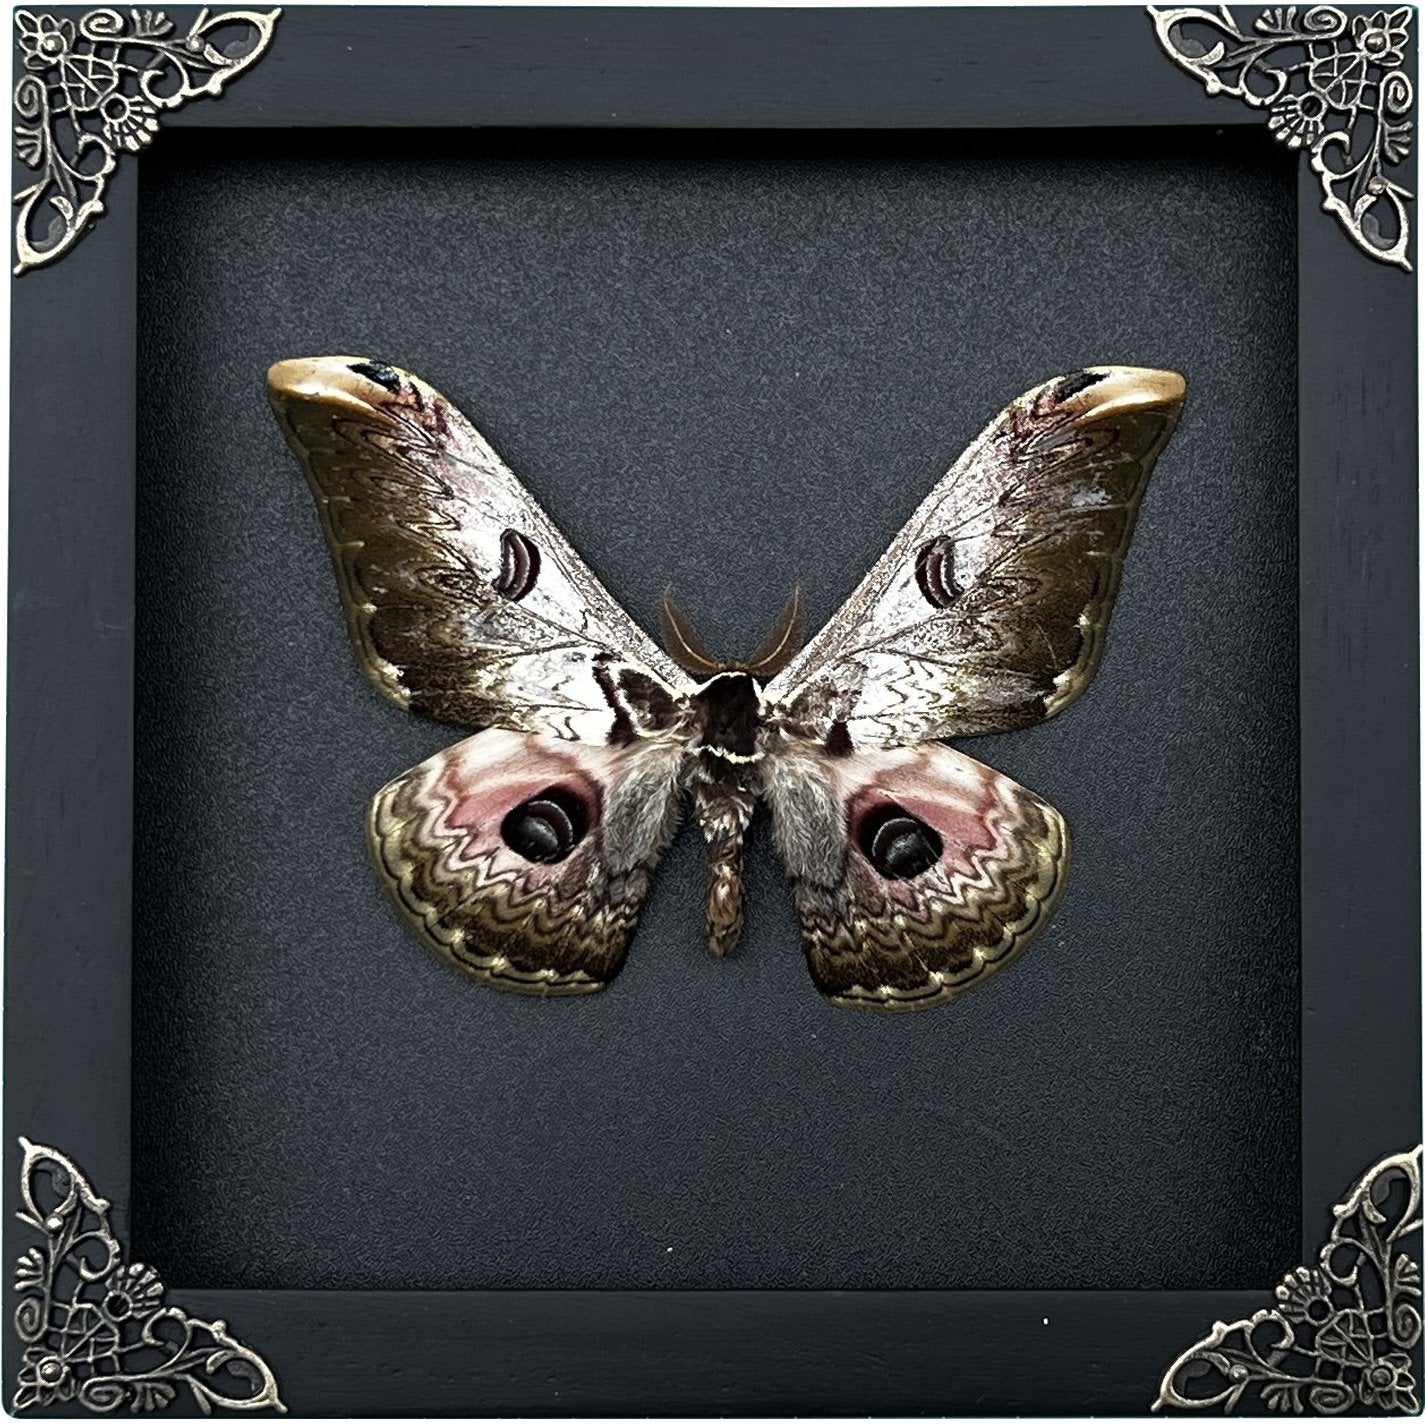 Real Framed Butterfly Black Wooden Shadow Box Dried Saturniidae Insect Lover Taxidermy Dead Bug Taxadermy Specimen Display Wall Art Hanging Decoration - Vinacreations